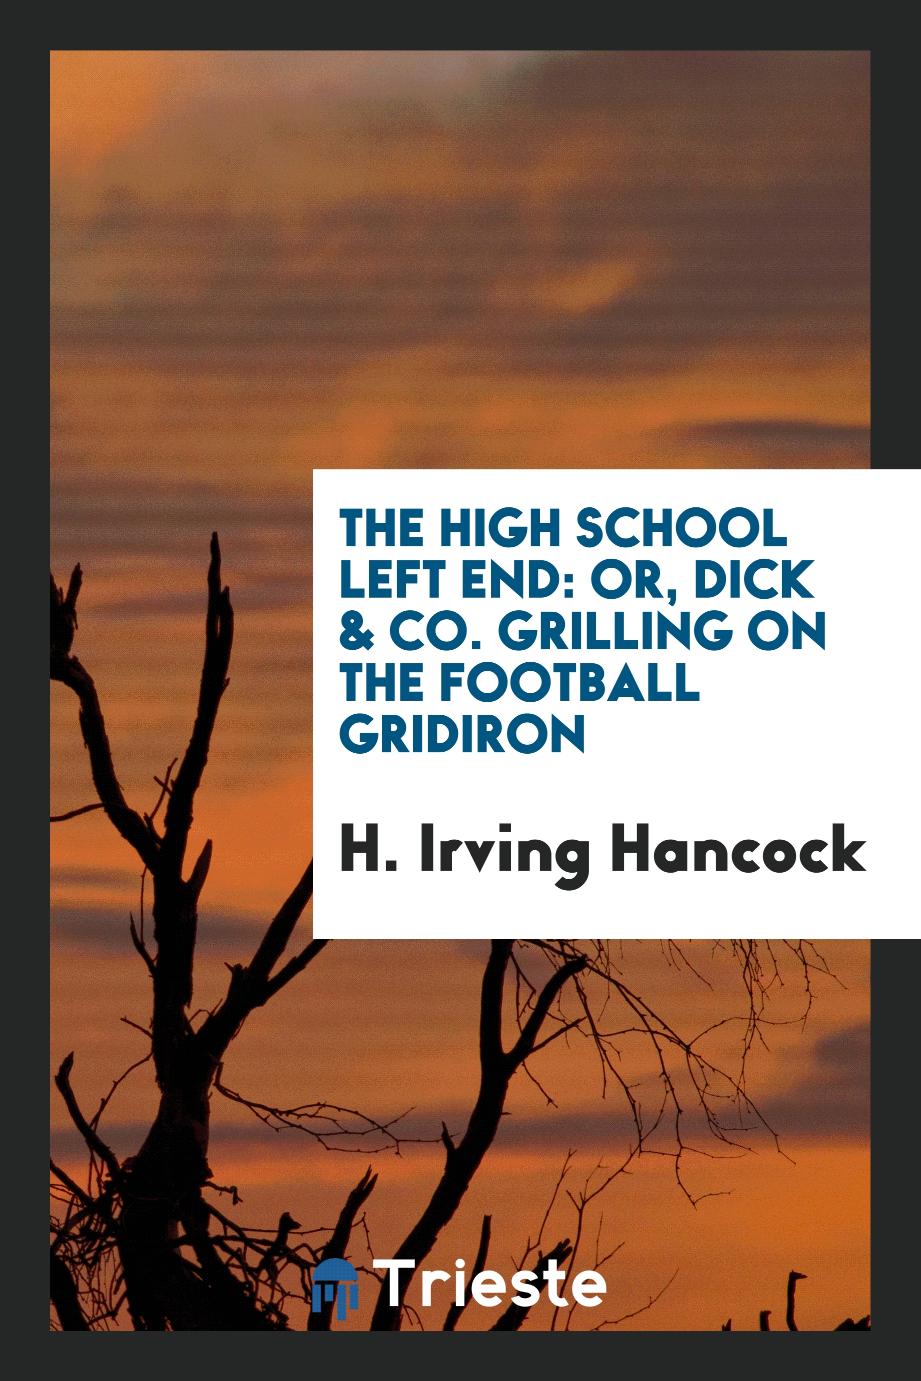 The high school left end: or, Dick & Co. grilling on the football gridiron